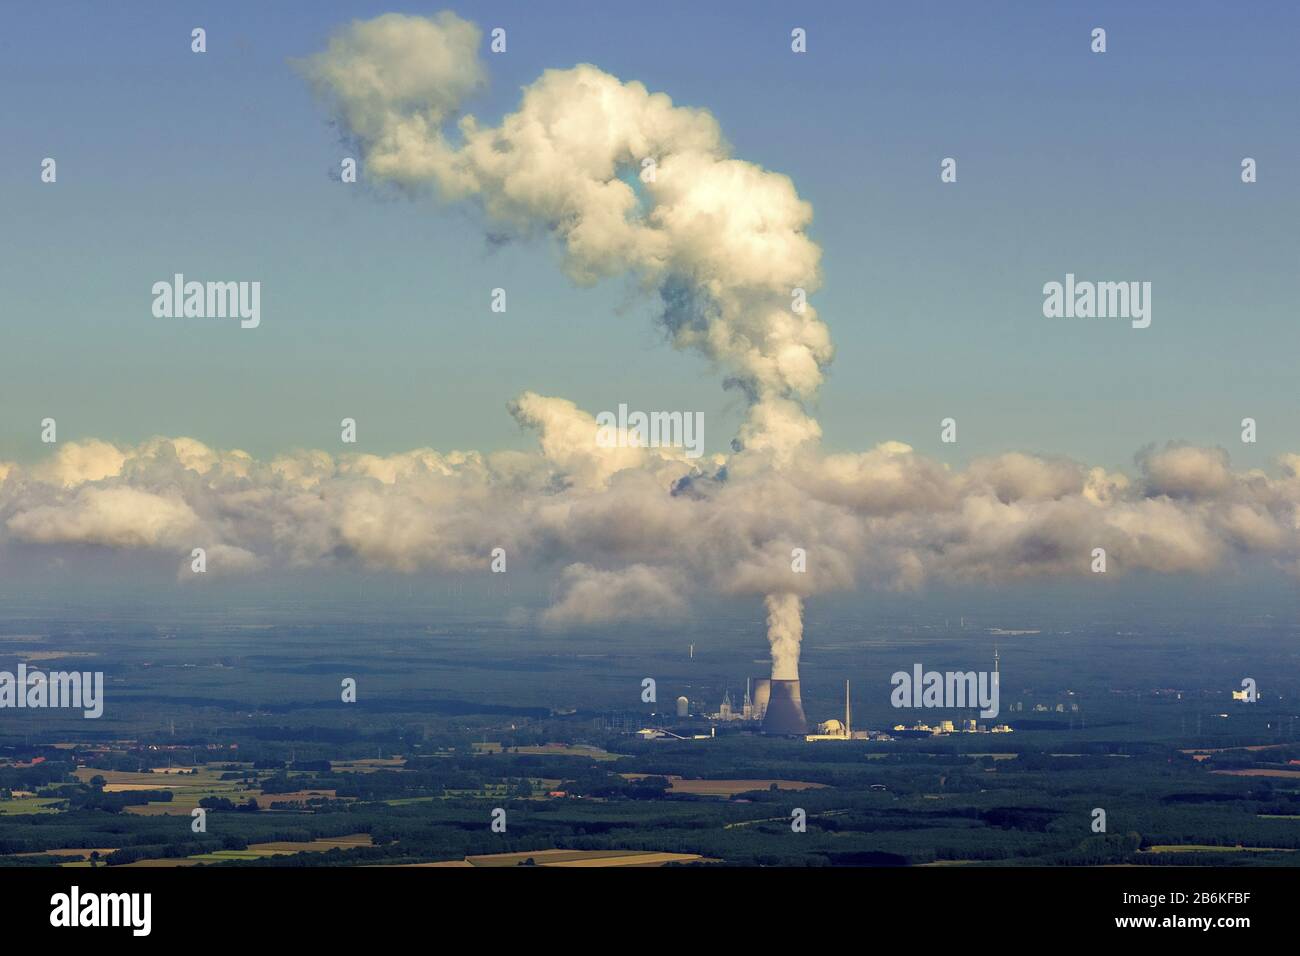 , former nuclear power plant, today natural gas power plant Emsland in Lingen at river Ems, aerial view, 27.08.2014, Germany, Lower Saxony, Lingen (Ems) Stock Photo